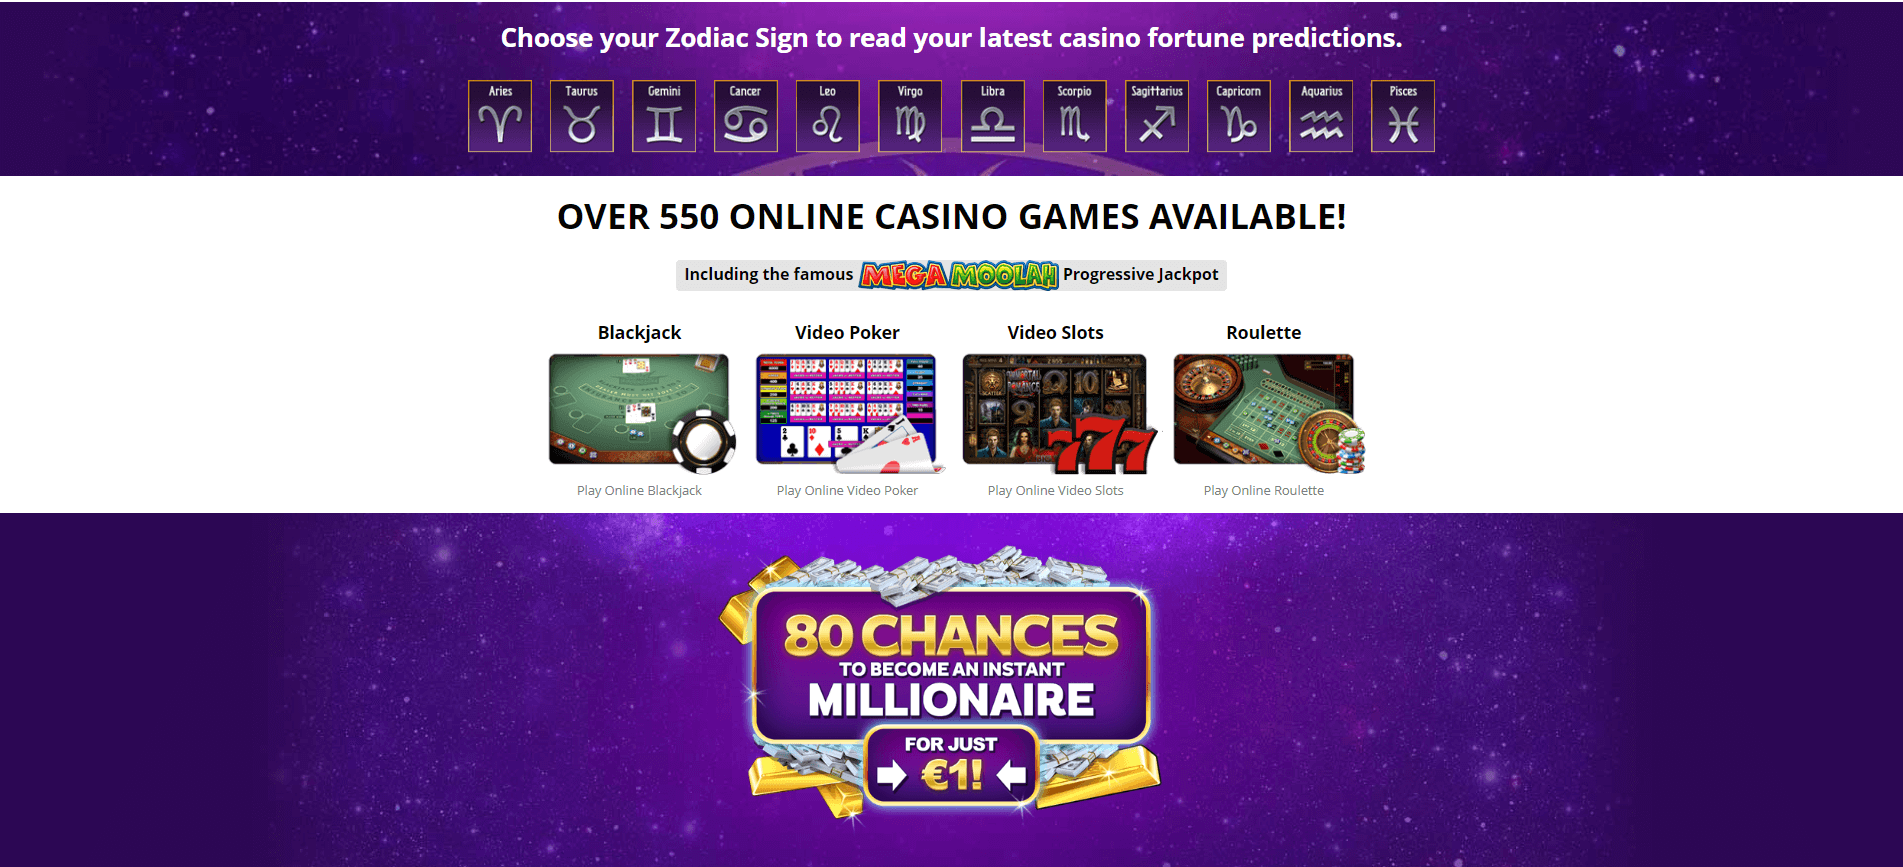 which site can nz play in zodiac casino